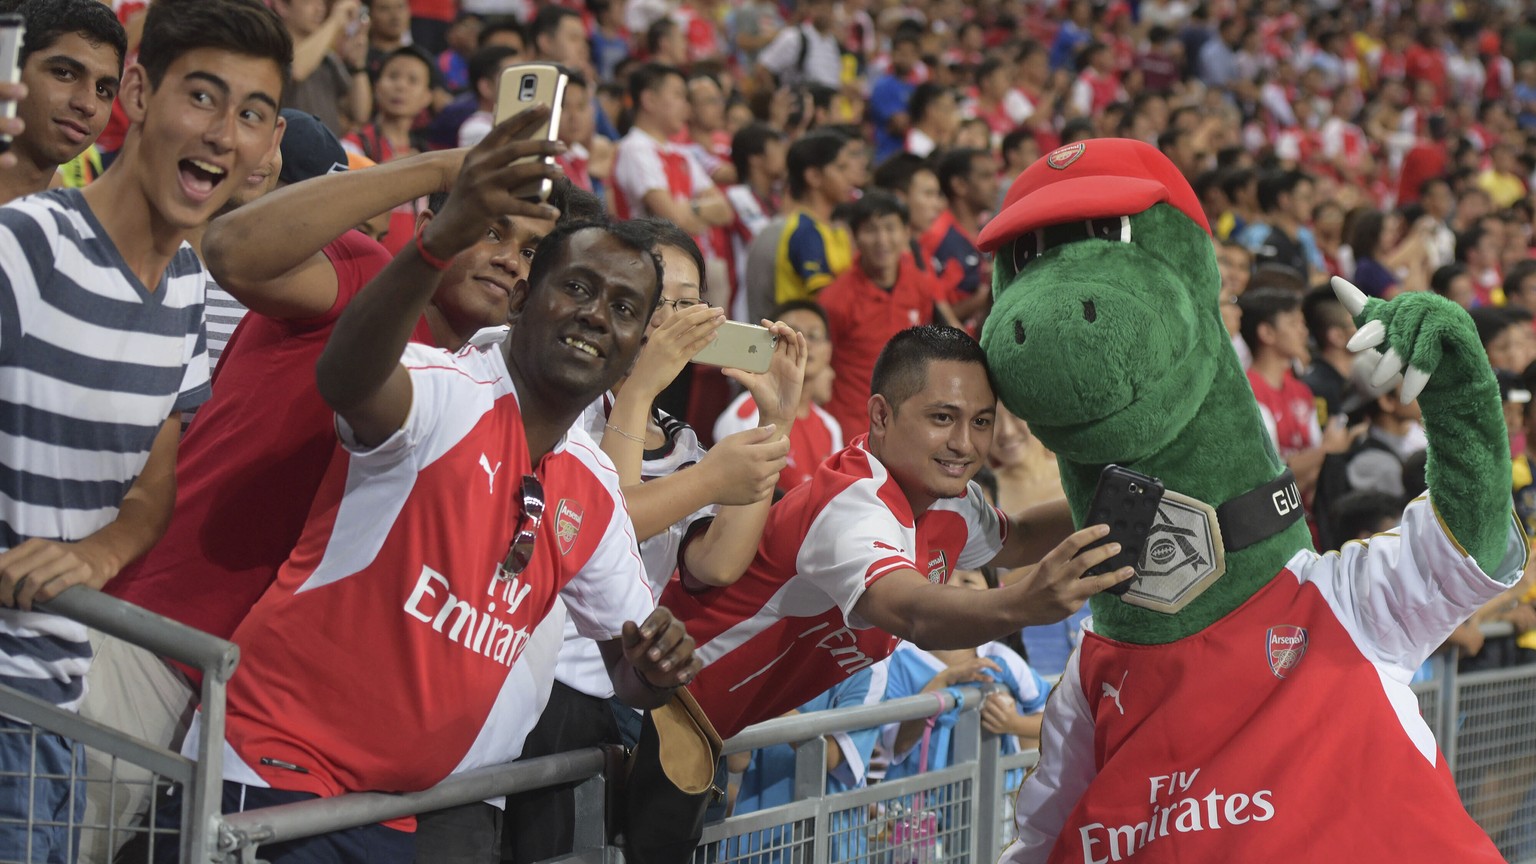 FILE - In this Saturday, July 18, 2015 file photo, fans pose for pictures with Arsenal&#039;s mascot Gunnersaurus ahead of their team&#039;s soccer match against Everton for the Barclays Asia Trophy i ...